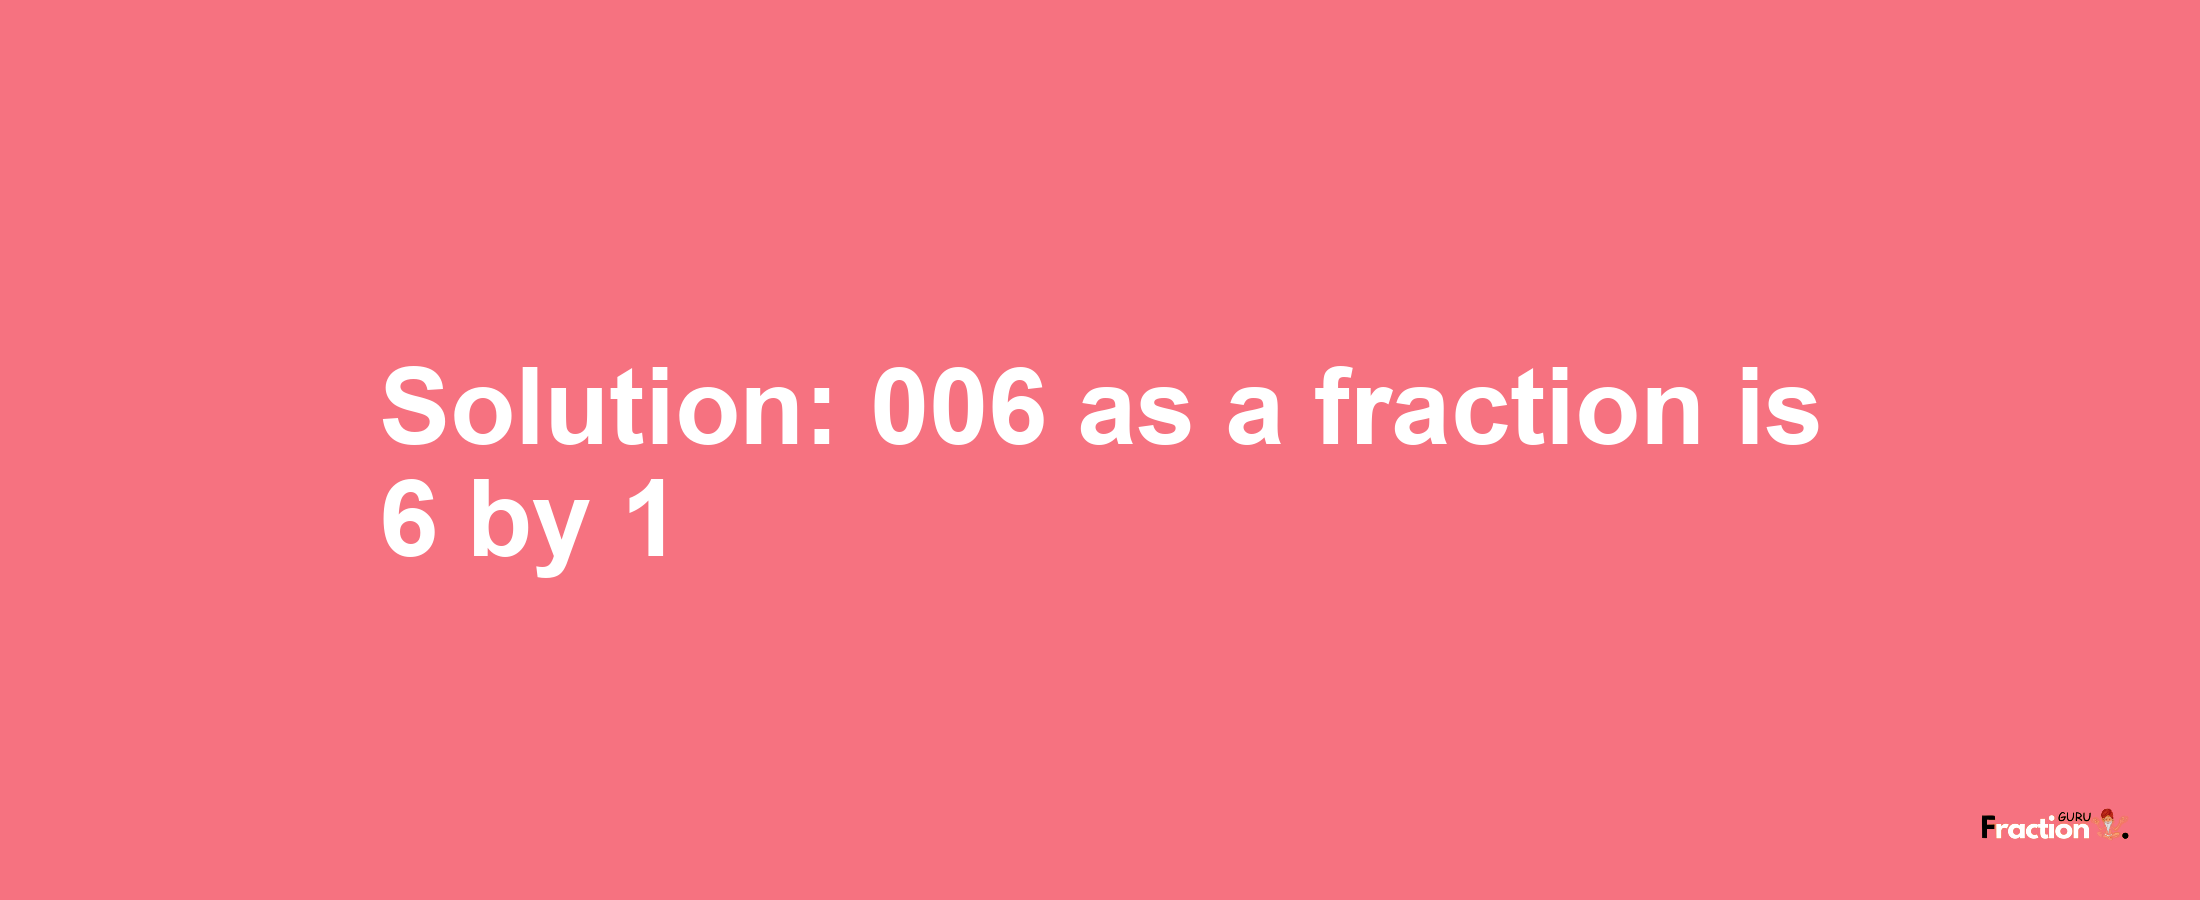 Solution:006 as a fraction is 6/1